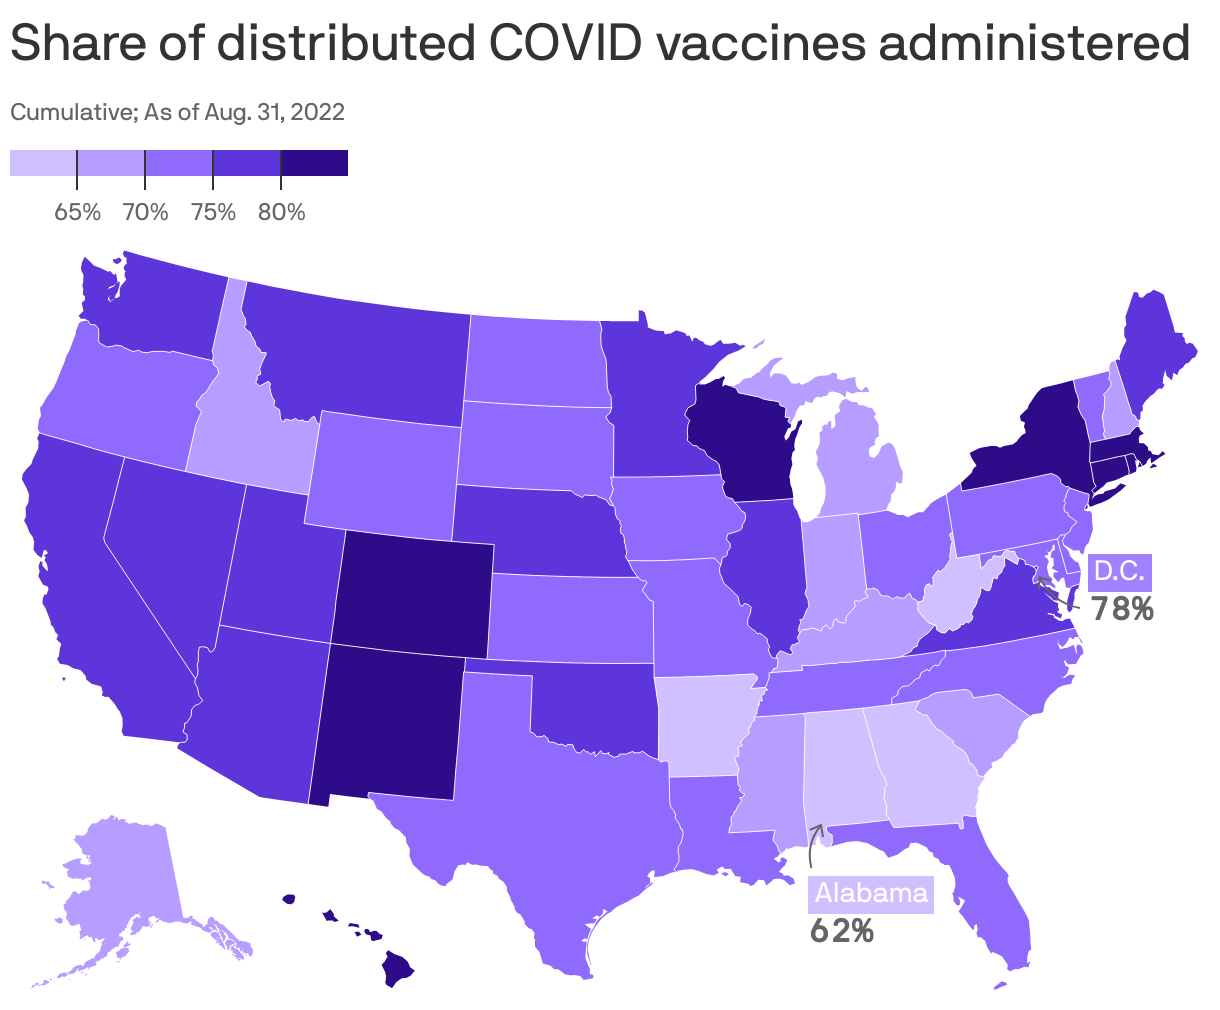 Share of distributed COVID vaccines administered